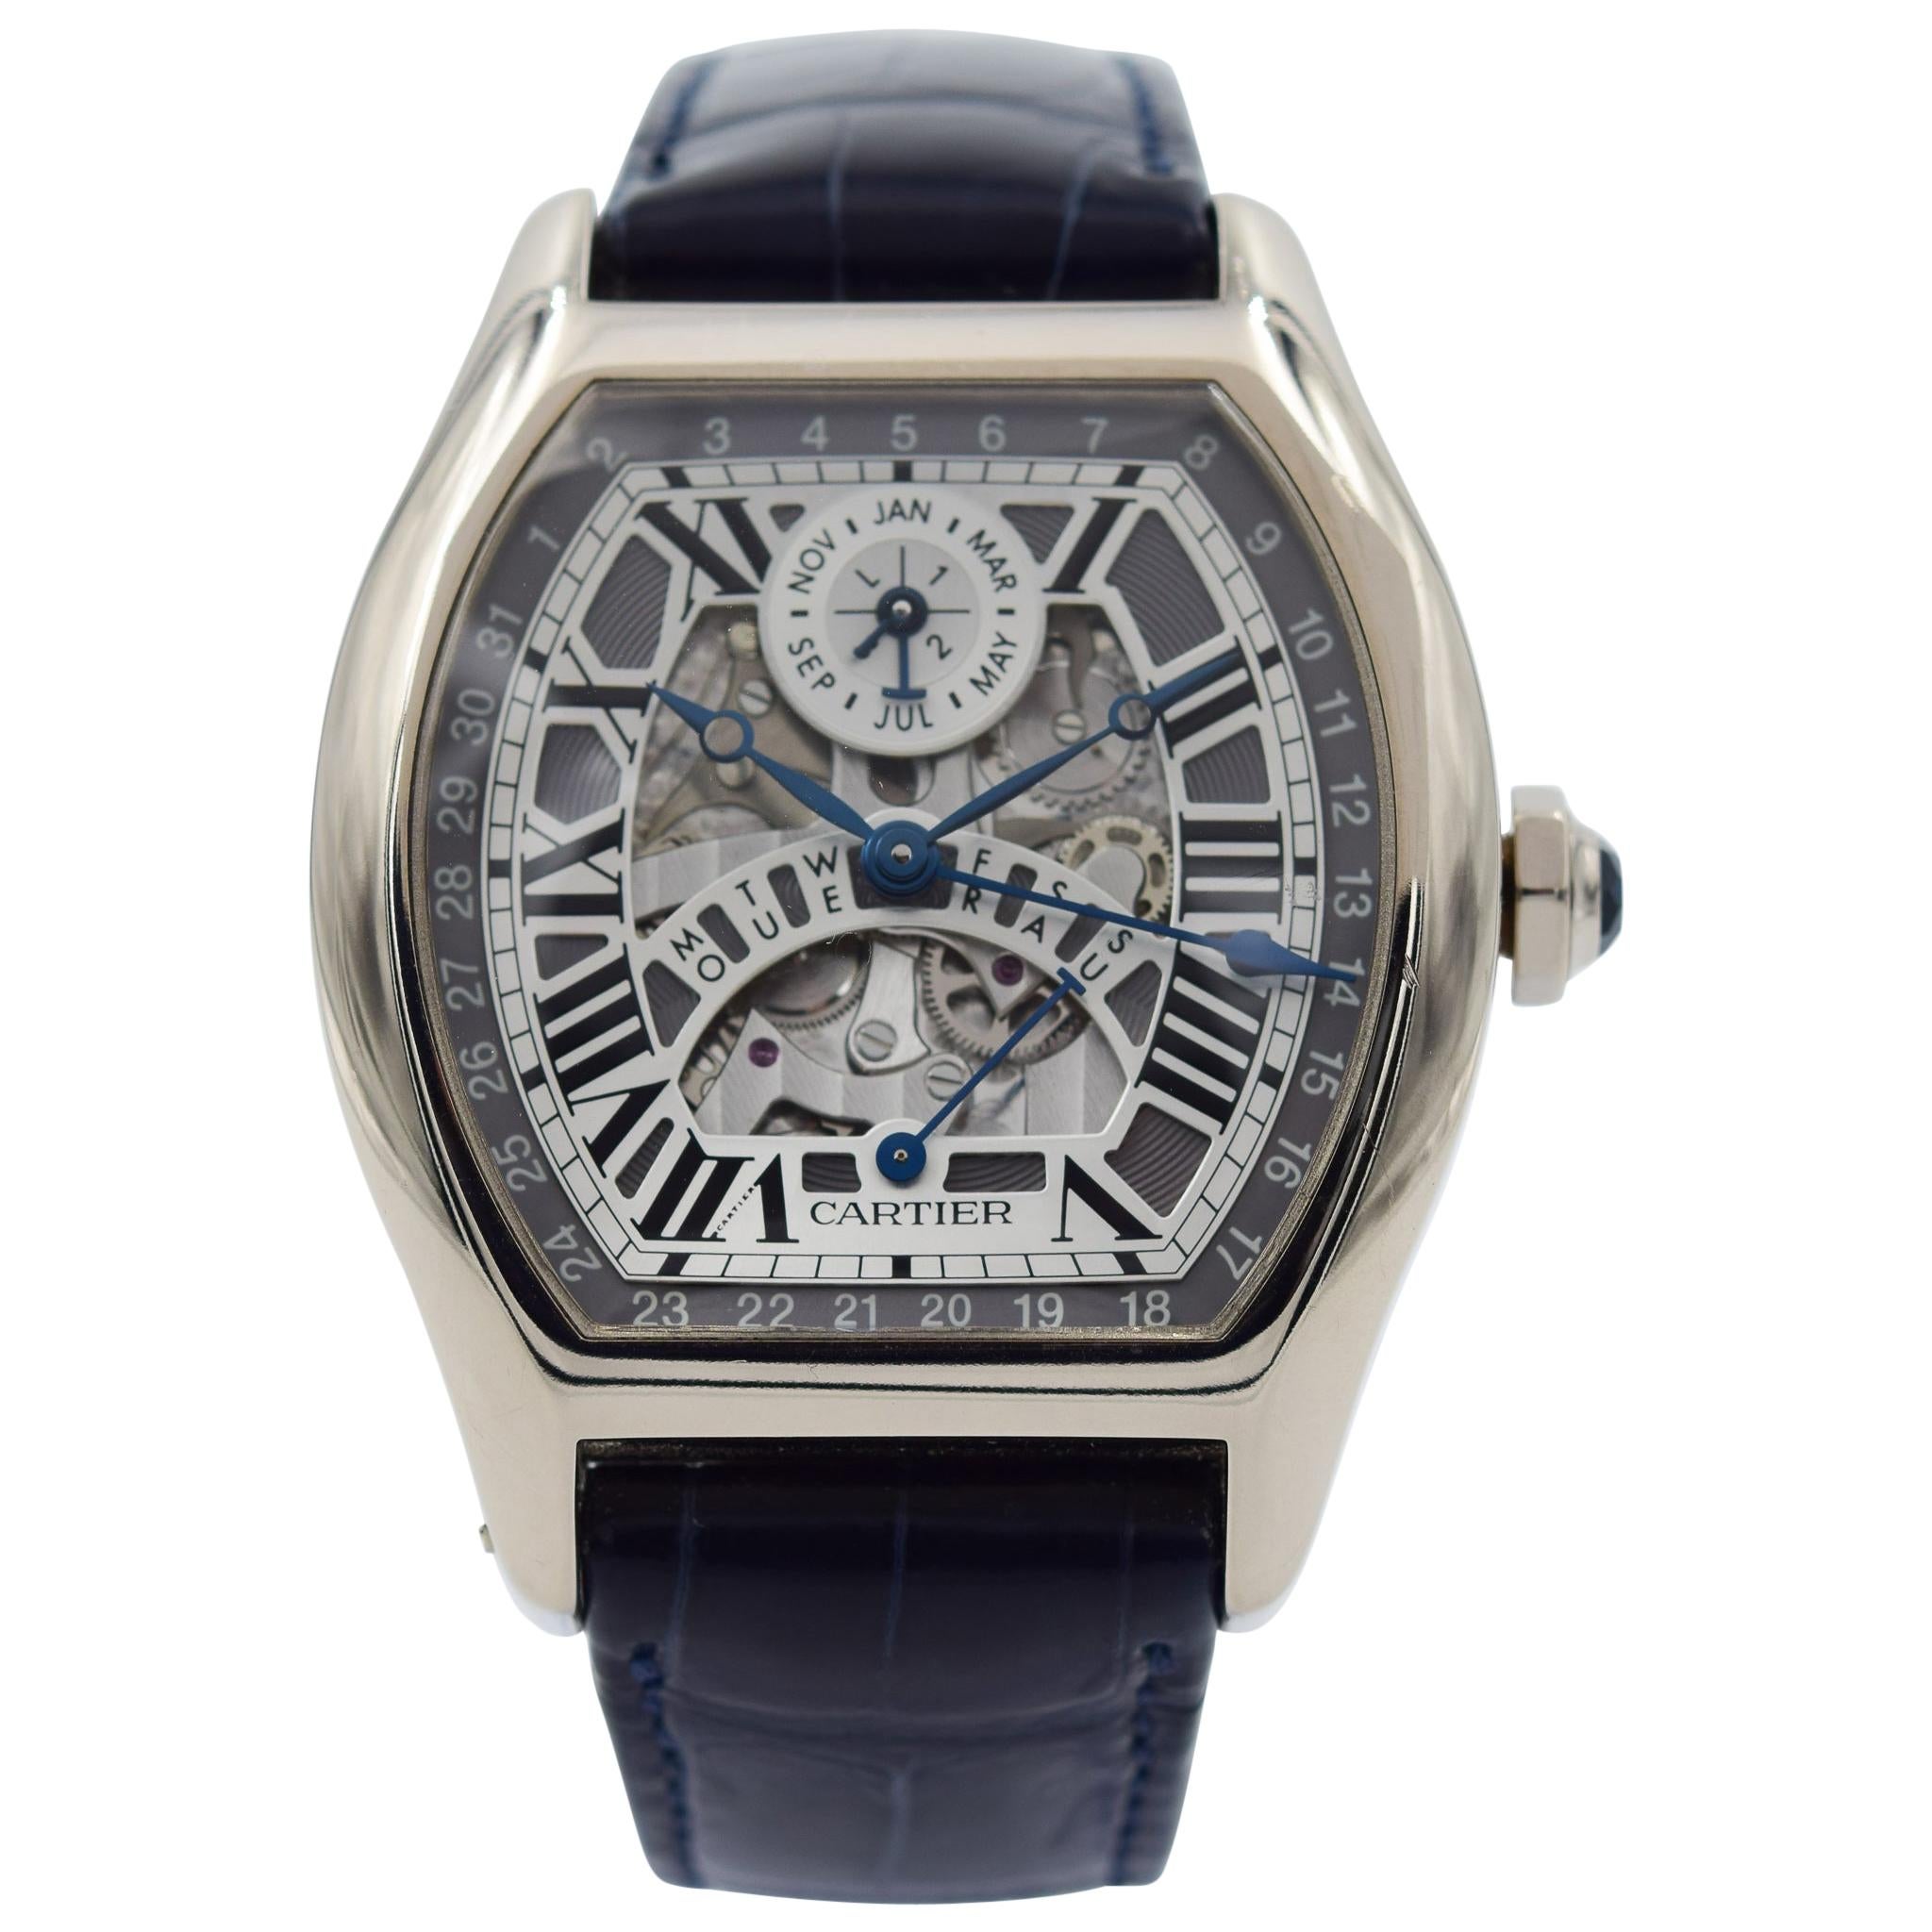 Cartier Tortue Perpetual Calendar in 18k White Gold W1580004, Full Box / Papers